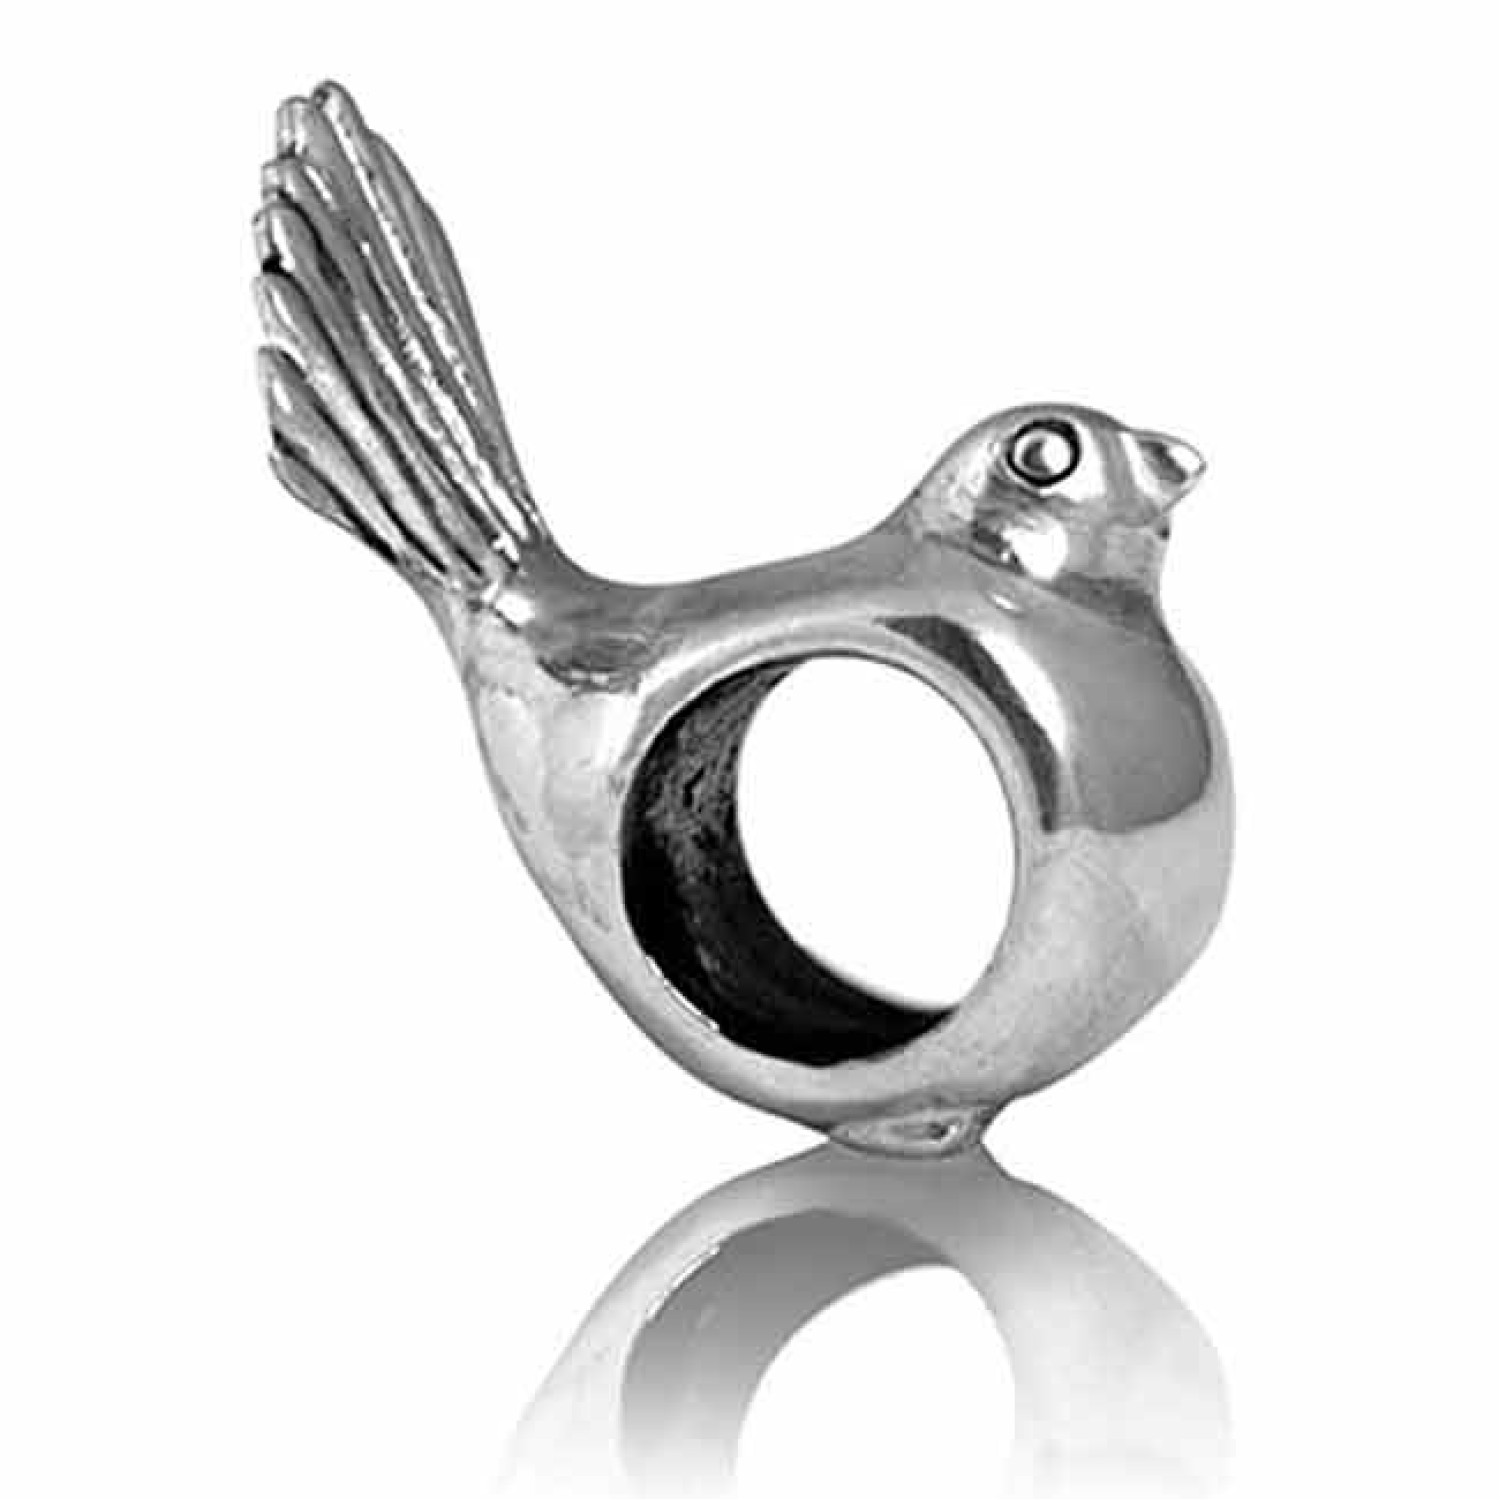 LK150 Evolve  NZ Fantail Bird. Evolve Silver Charm NZ Fantail Bird Our cute Fantail charm celebrates one of New Zealand’s most treasured native birds. The unique and curious fantail (piwakawaka in Maori) is respected as a symbolic messenger. &nb @chri